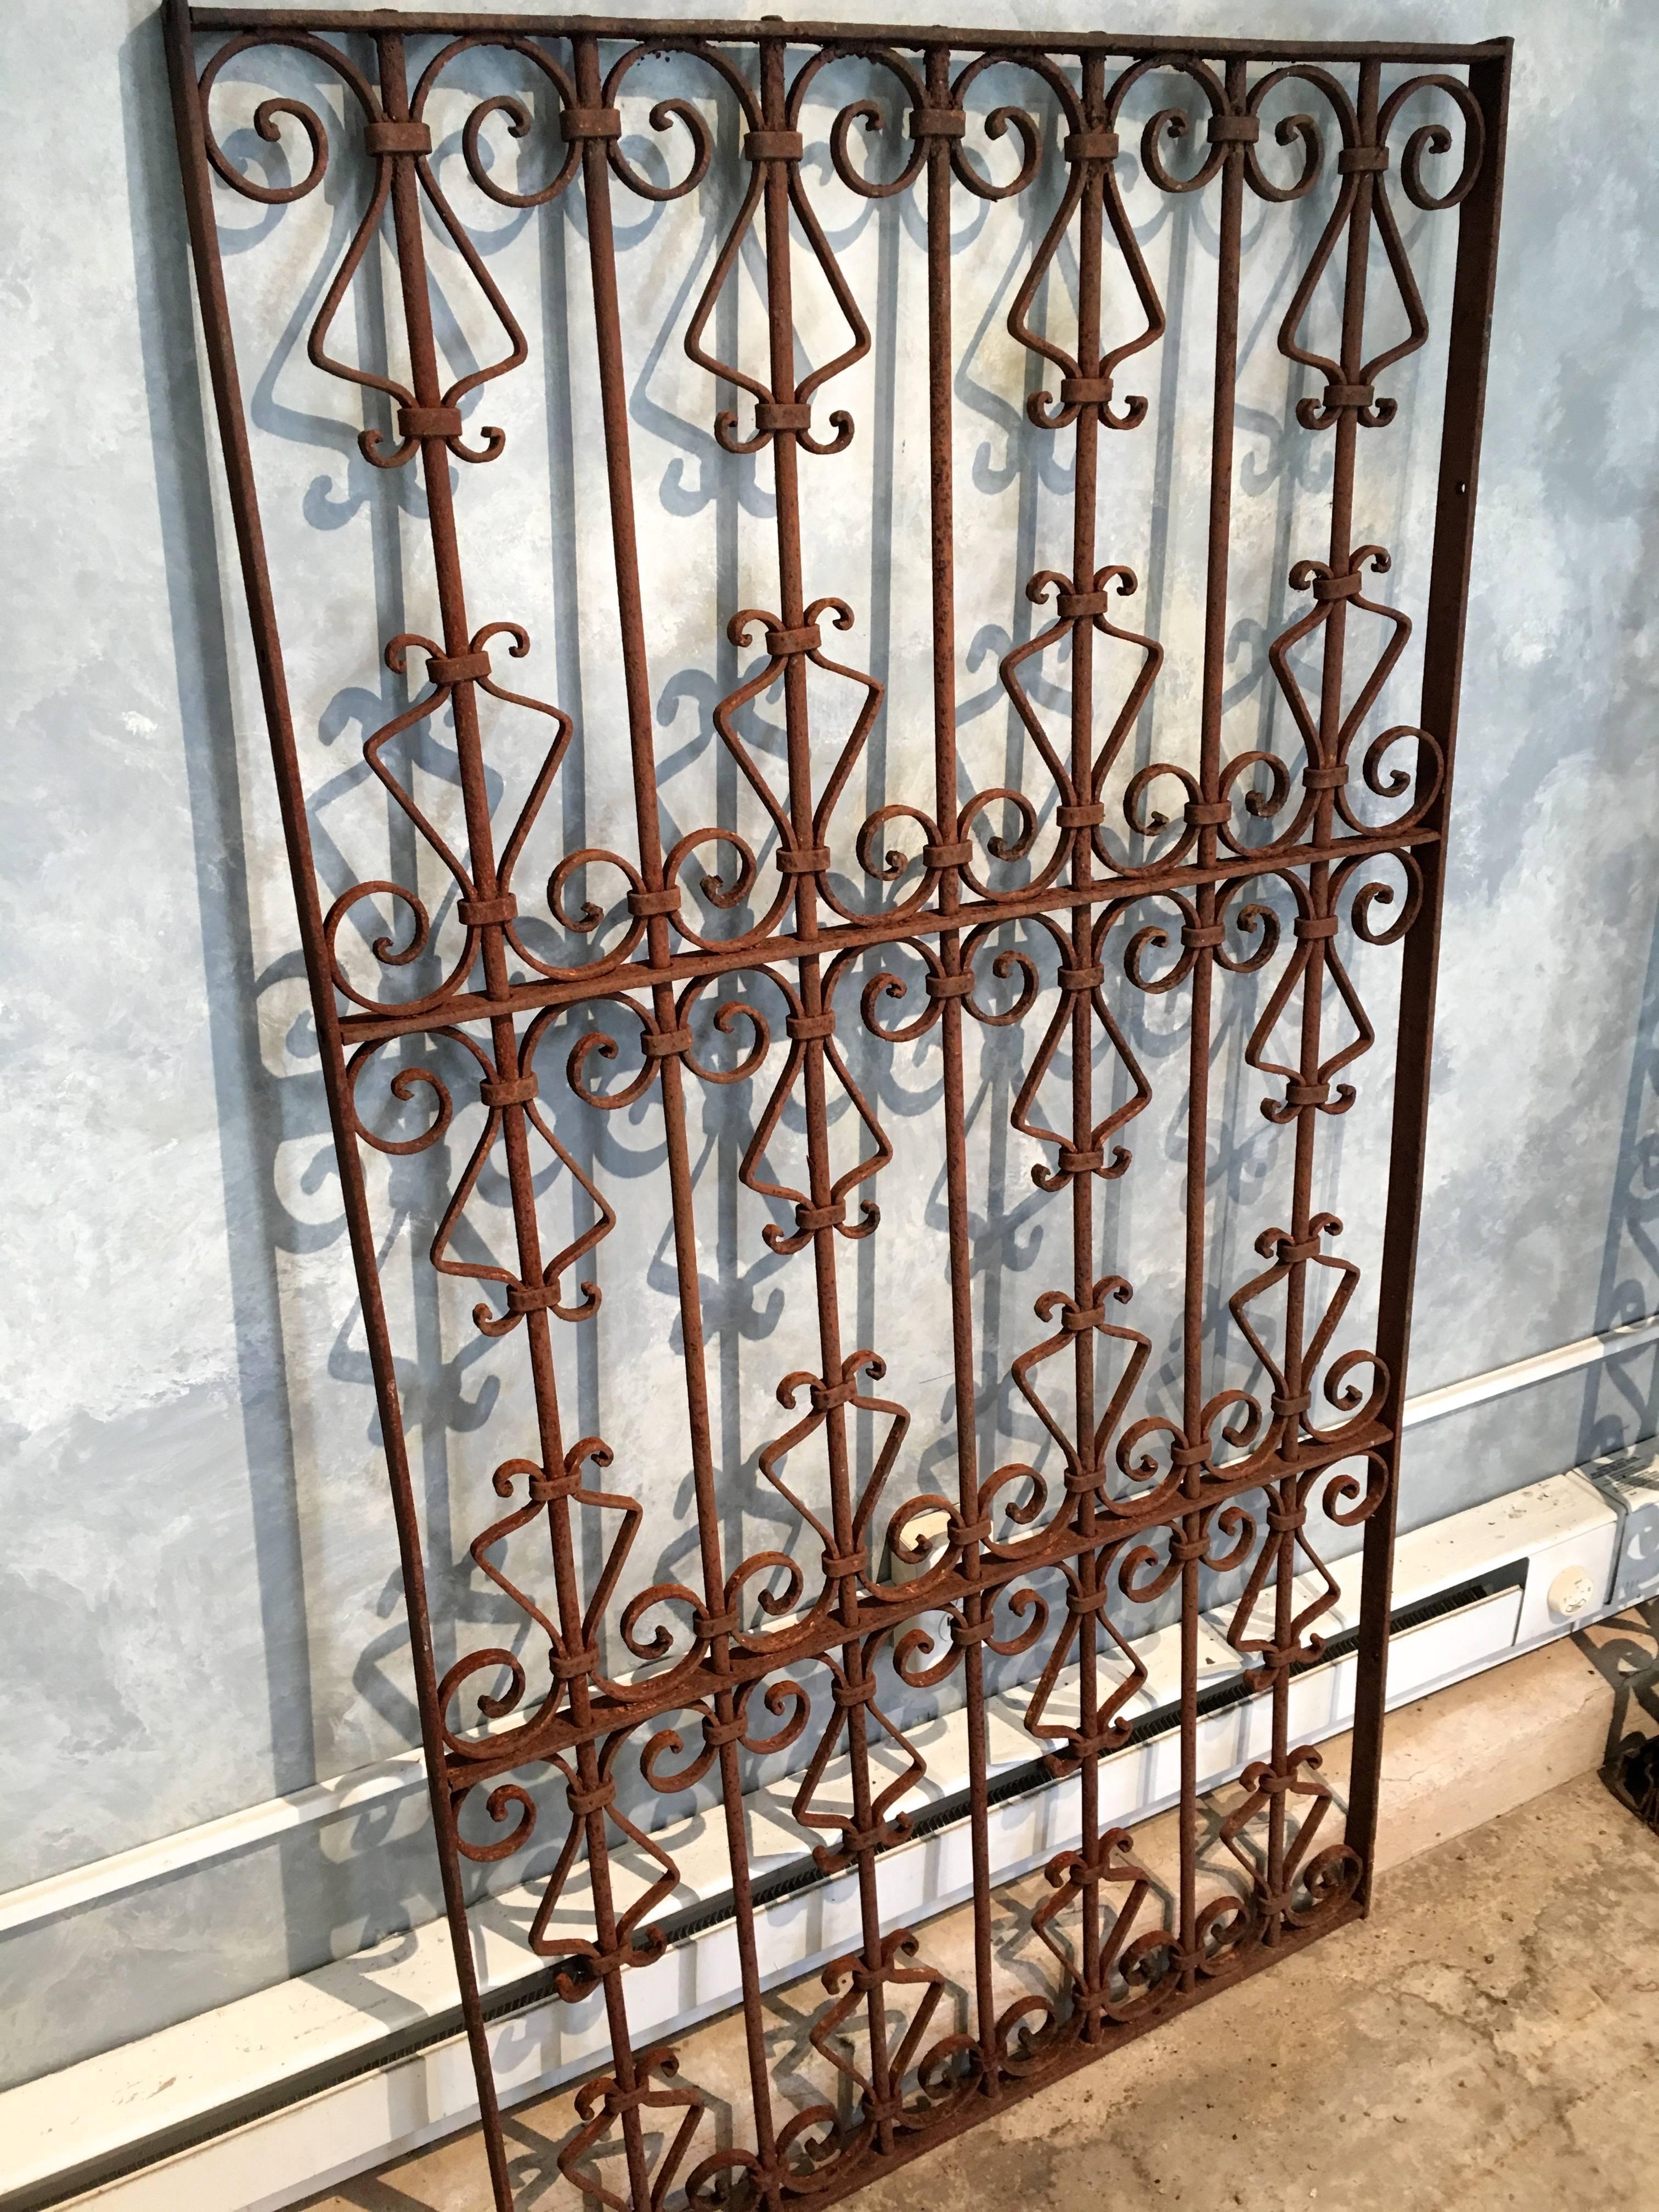 This lovely hand-wrought iron grille was not originally intended as a gate, but could easily be transformed into one with hinges by our talented blacksmith. It is in perfect structural condition, with surface rusting, and, of course, can be